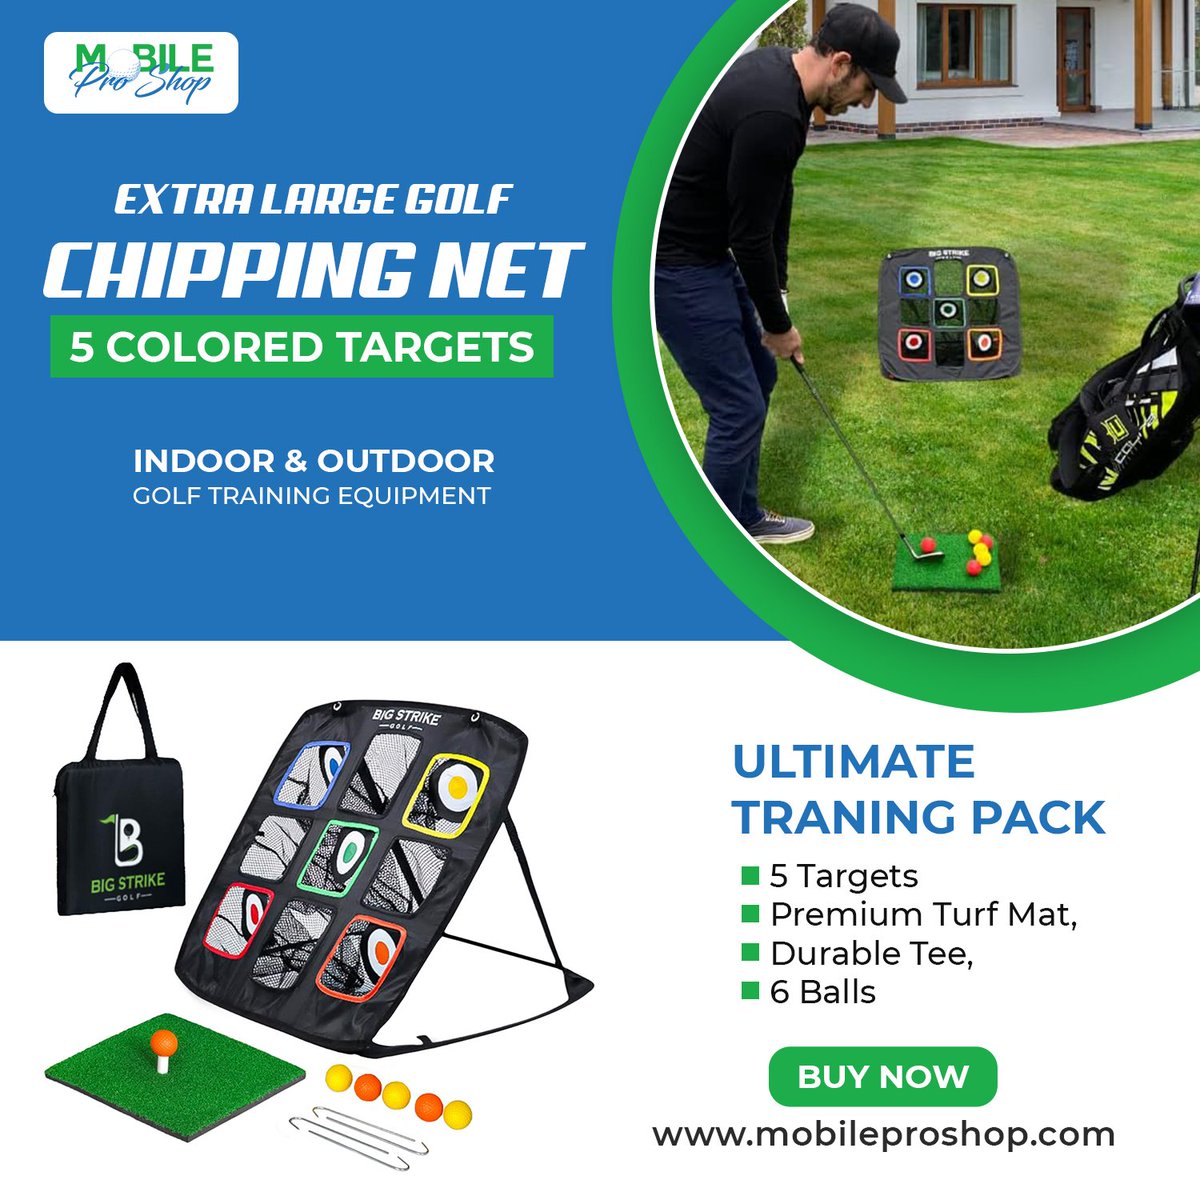 Big Strike Golf - Extra Large Golf Chipping Net. Golf Practice Net Colored Targets, Indoor and Outdoor Golf Training Equipment, Durable Golf Chipping Net!

#BigStrikeGolf #GolfTraining #ChippingNet #GolfSkills #PracticeAnywhere #IndoorGolf #OutdoorGolf #SkillEnhancement